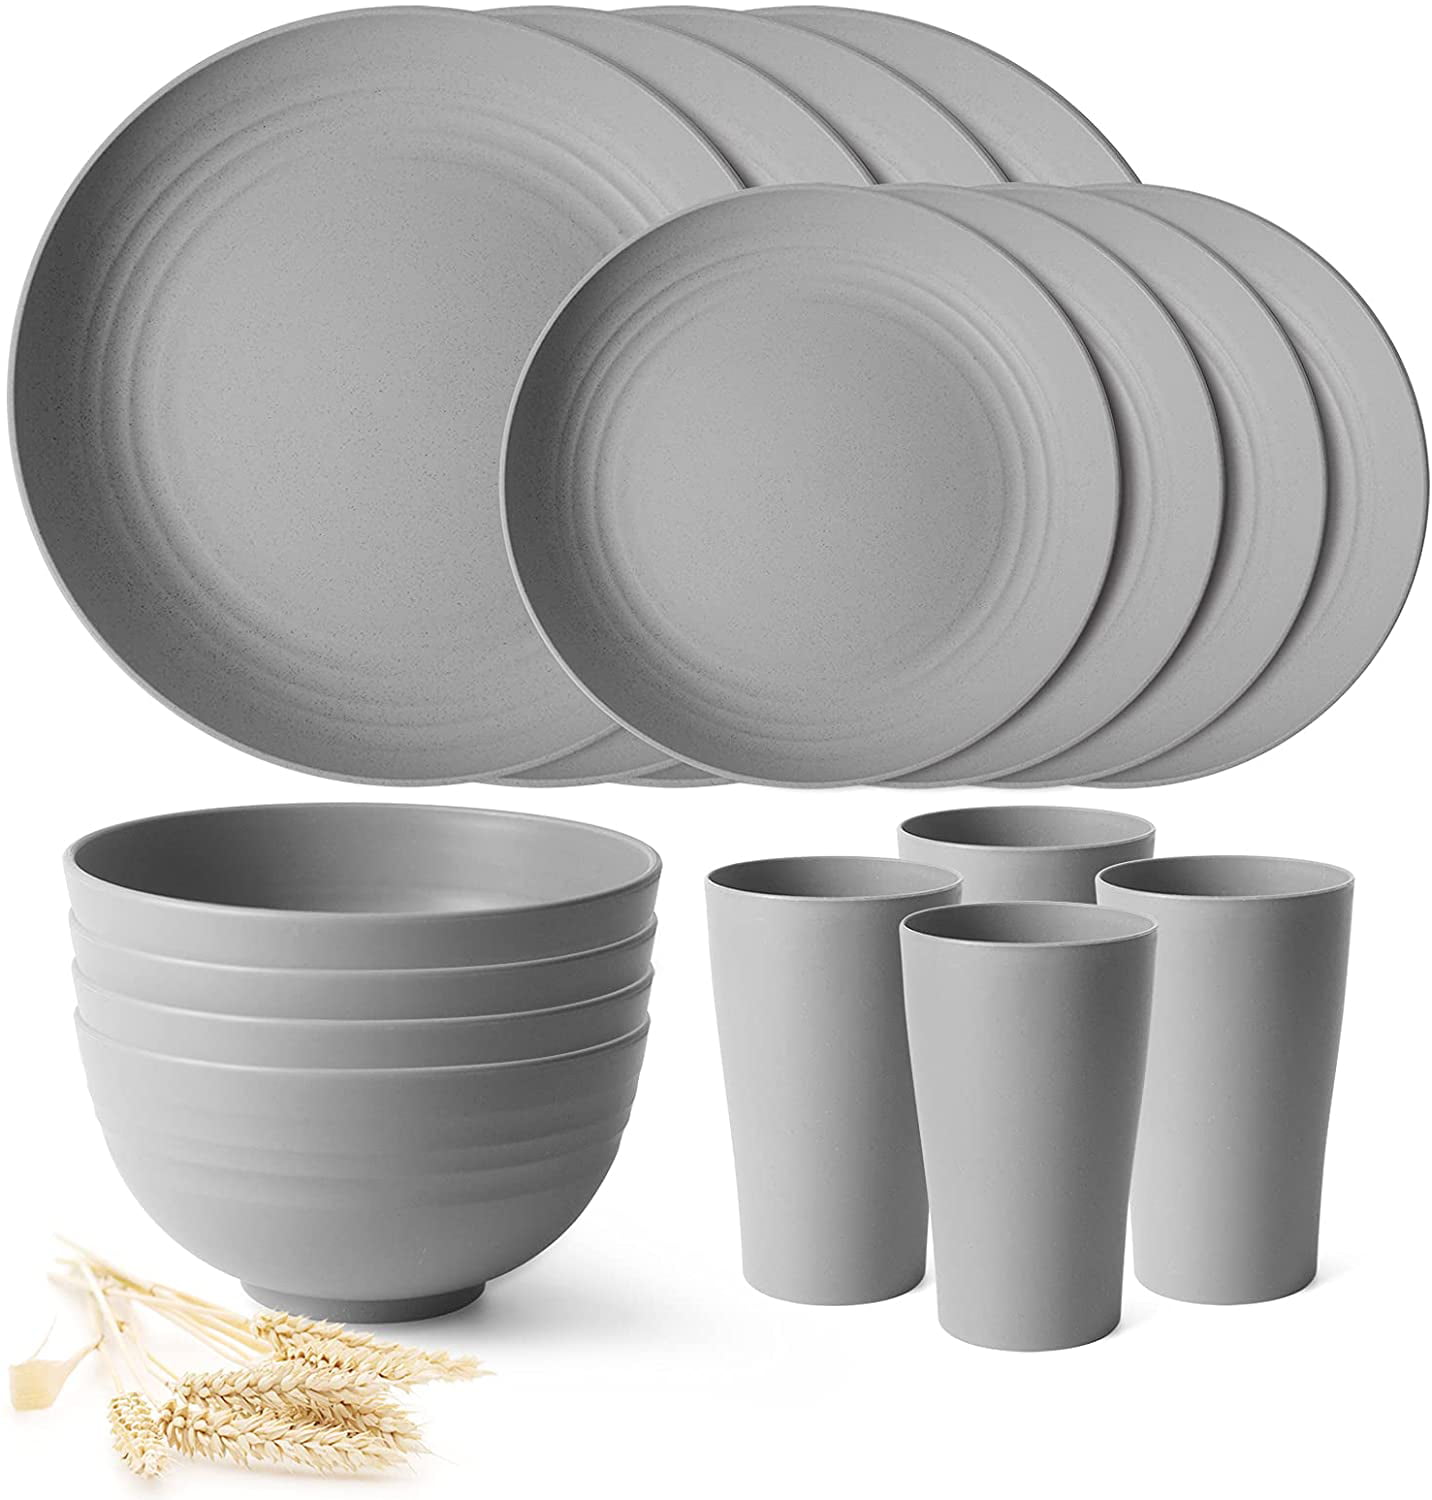 16Pc Outdoor Camping Dinner Set Melamine Plates Bowls Cups BBQ Picnic Crockery W 